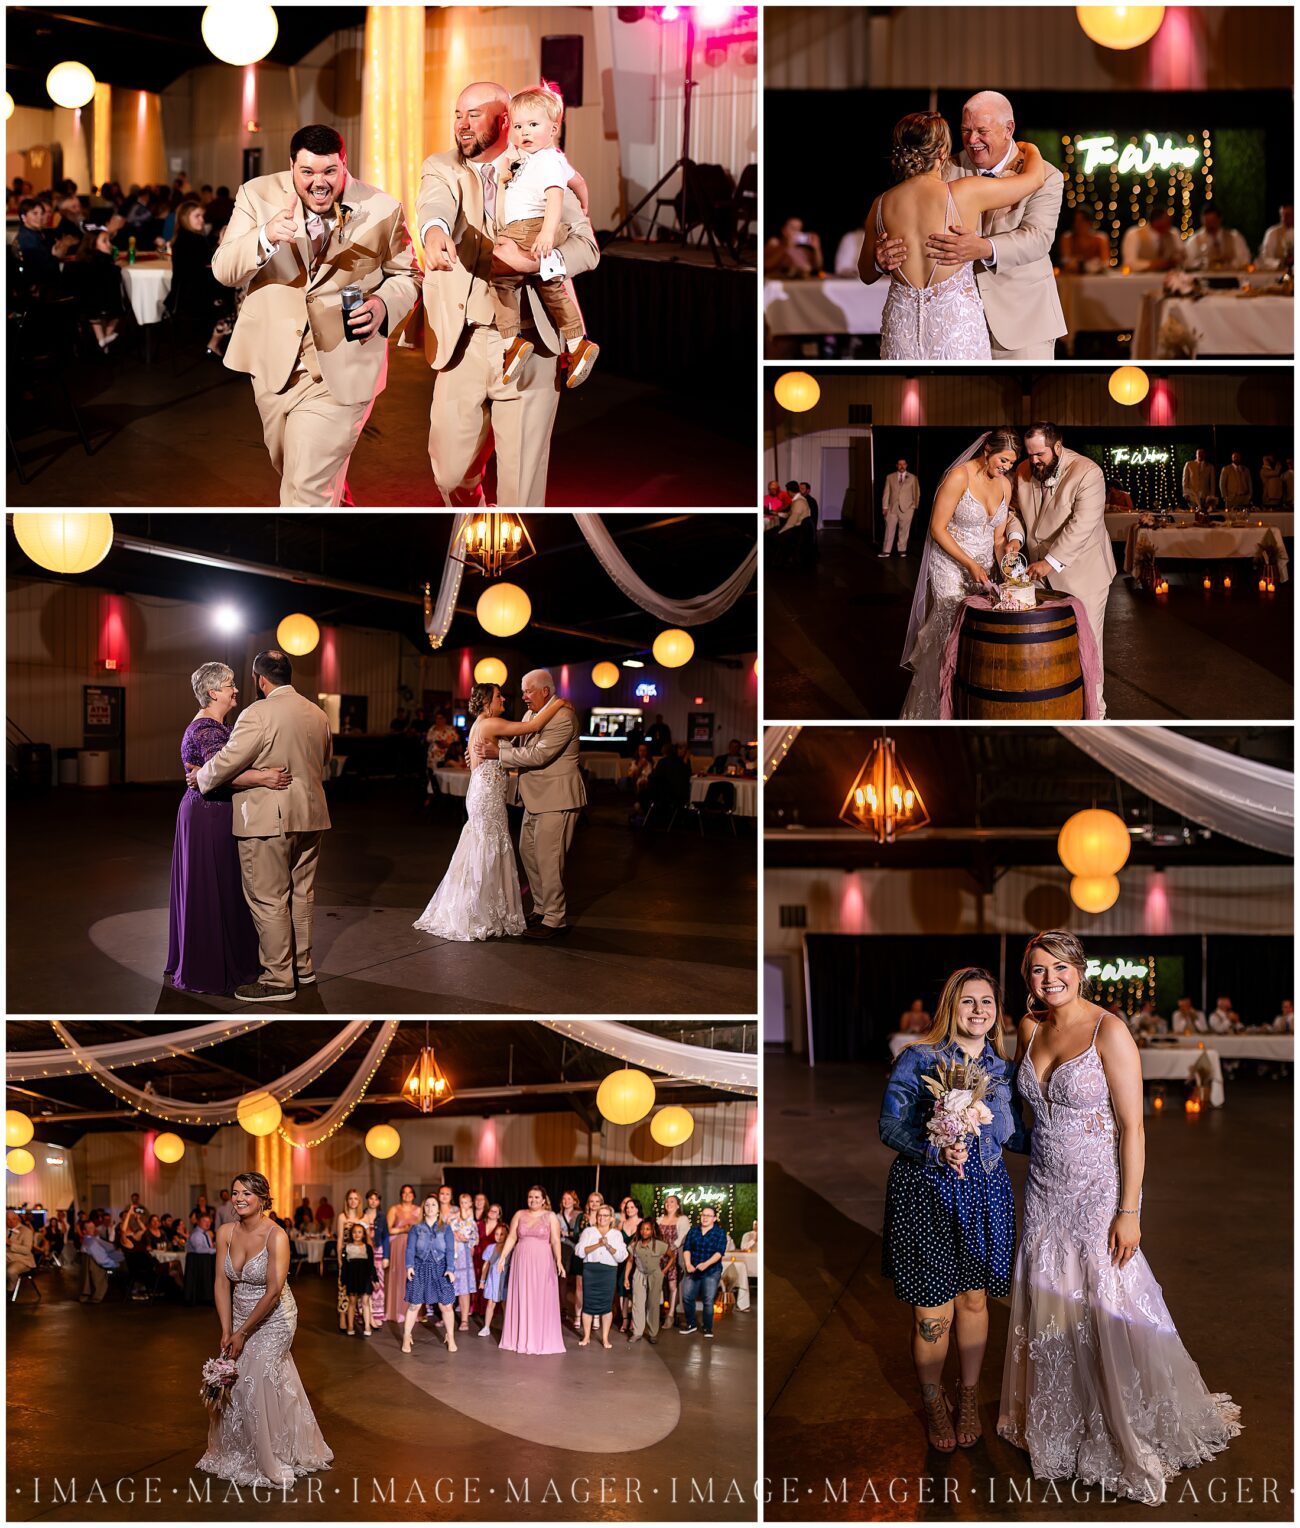 A small town wedding for Casey and Adam. A collection of images in a collage of events from the large wedding reception at the Kankakee County Fairgrounds. Including special dances, cake cutting, and the open dance floor.

Kankakee County Fairgrounds, Kankakee, IL.

Photo taken by Mager Image Photography.